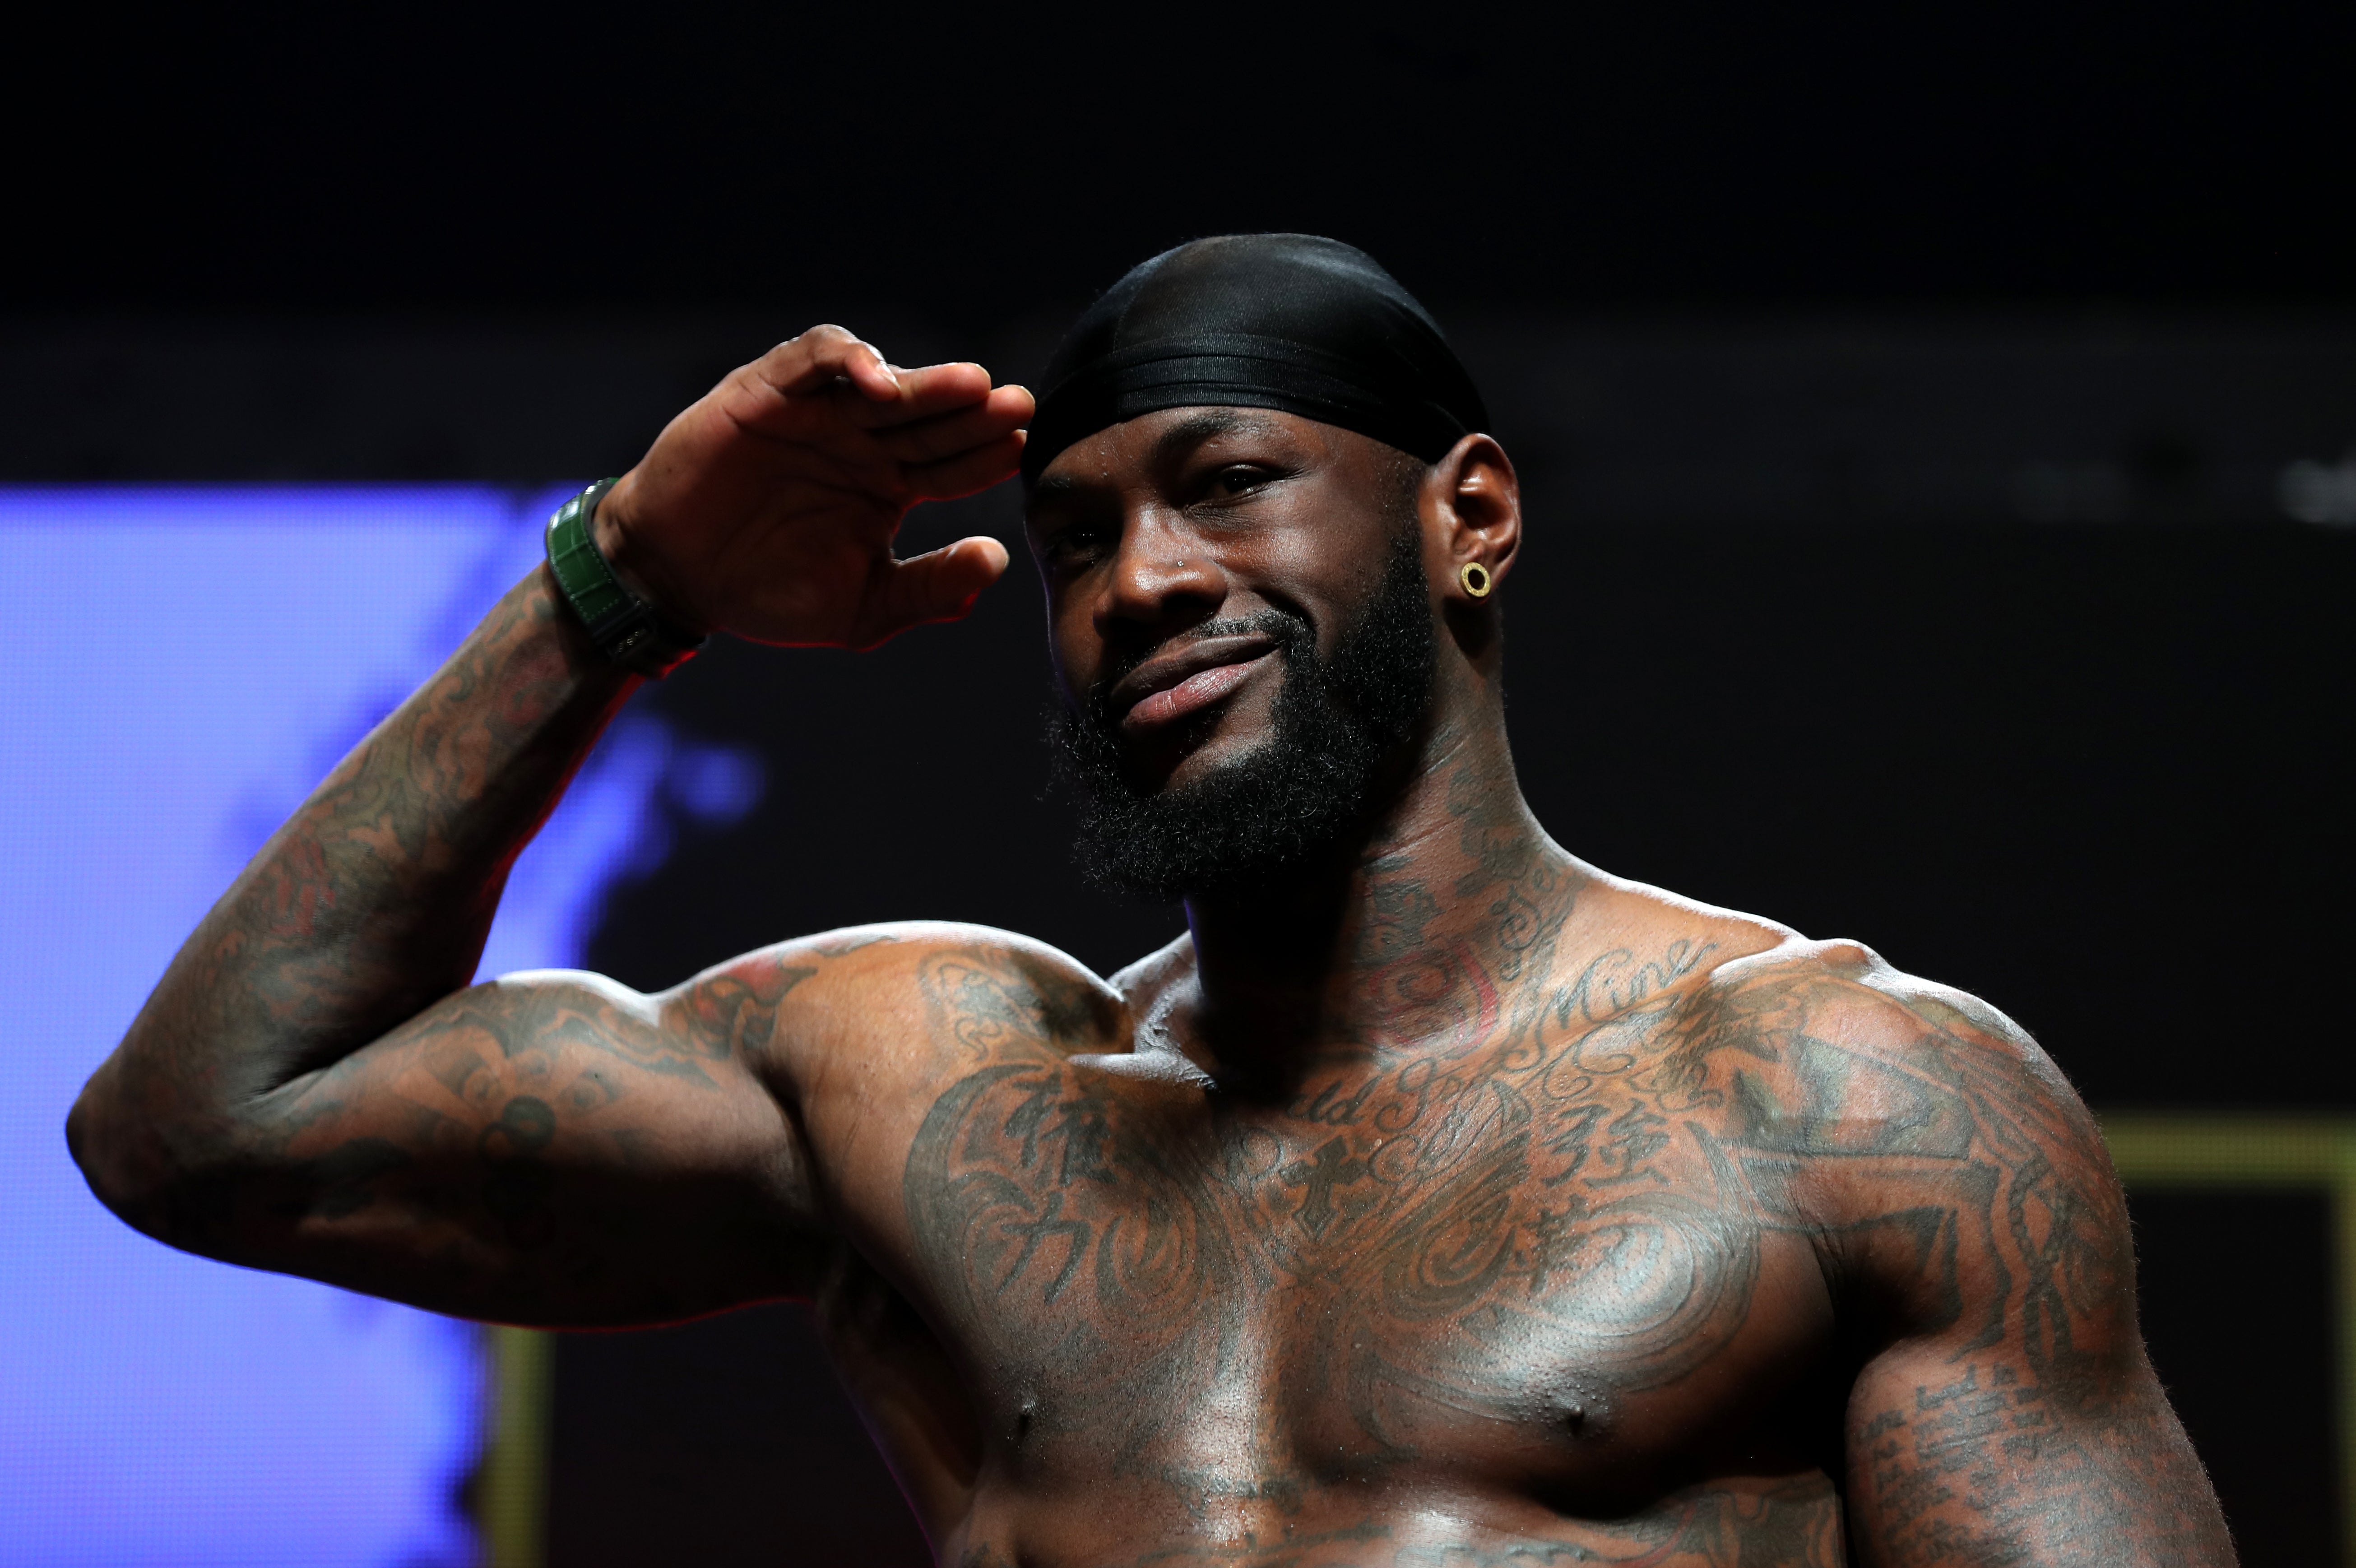 Deontay Wilder will face Tyson Fury for a third time later this year